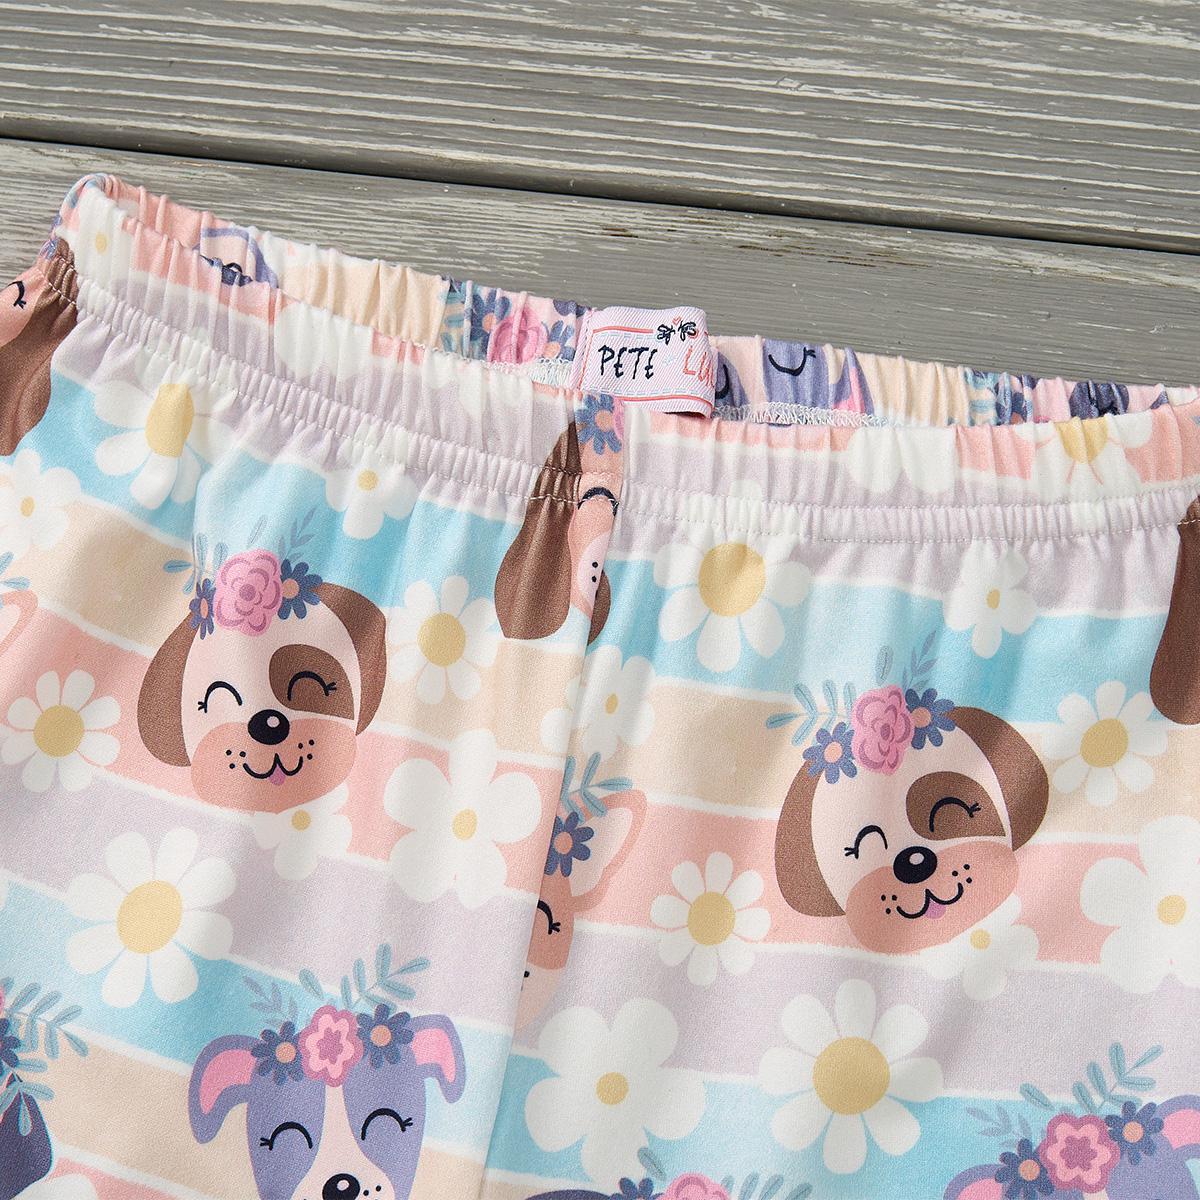 (Preorder) Puppy Blossoms Girl’s Loungewear Set by Pete + Lucy